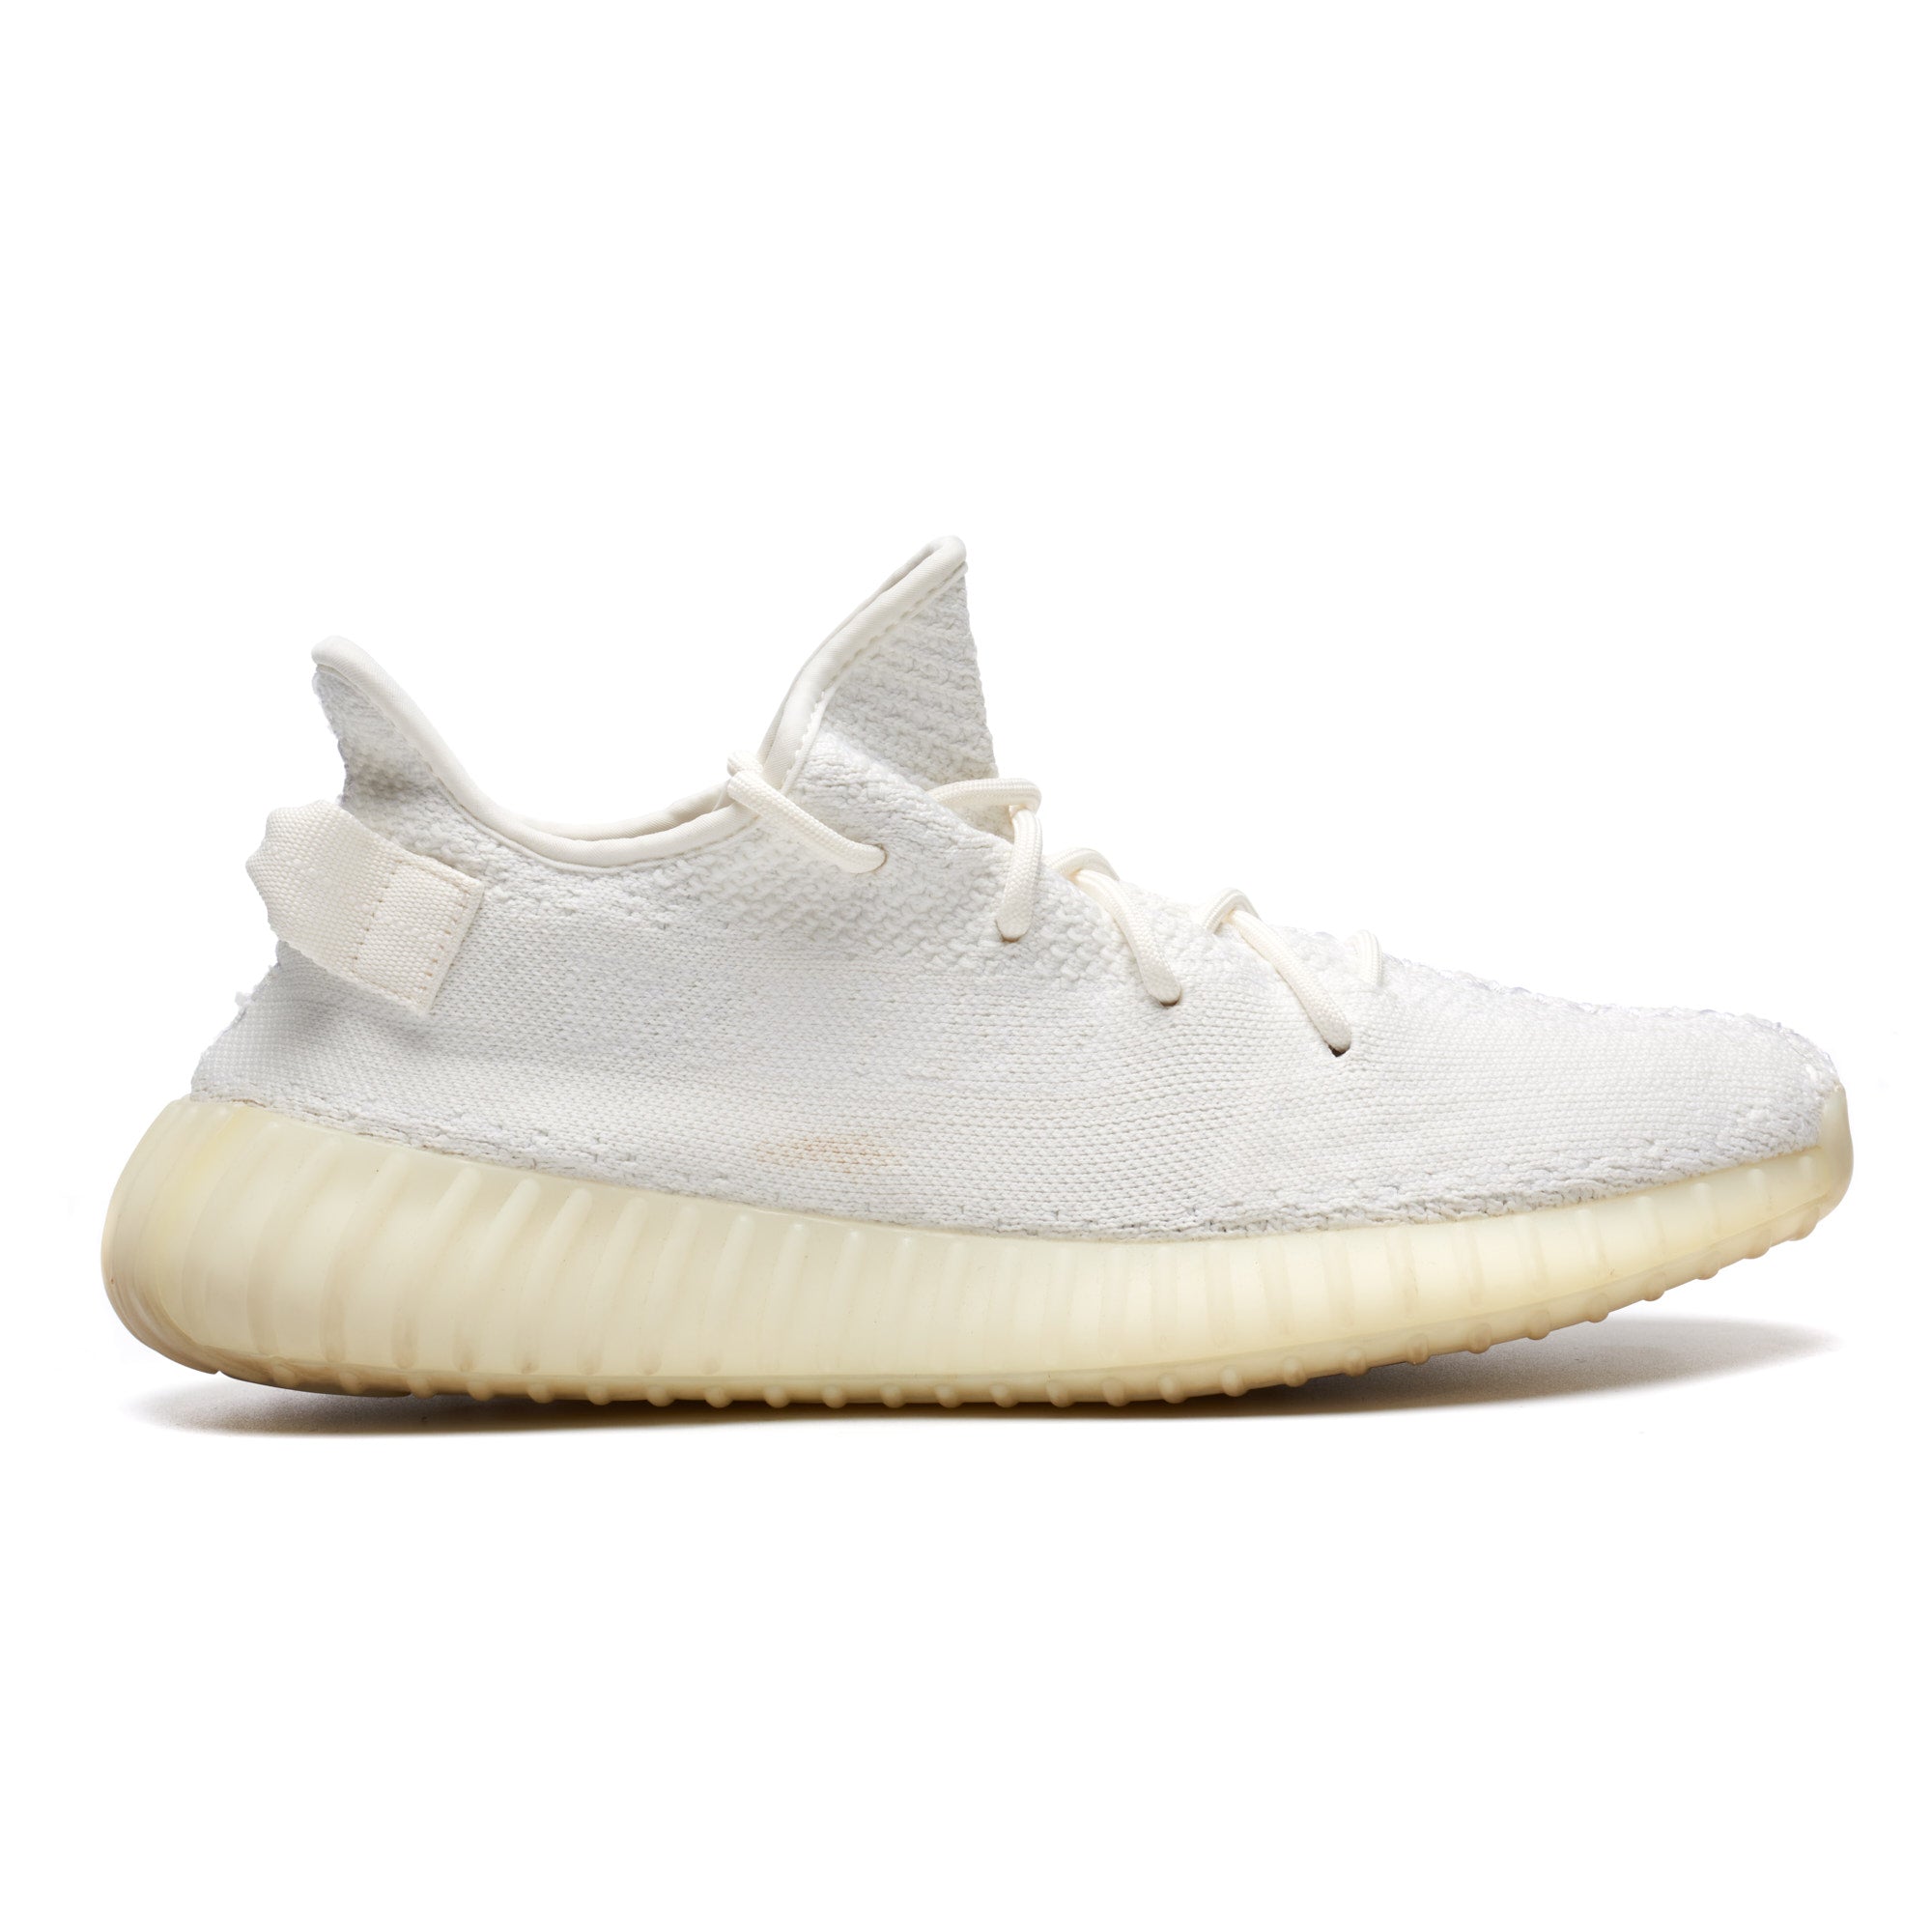 Top 5 Adidas Yeezy Sneakers to Invest in Include 350 Boost V2, 700